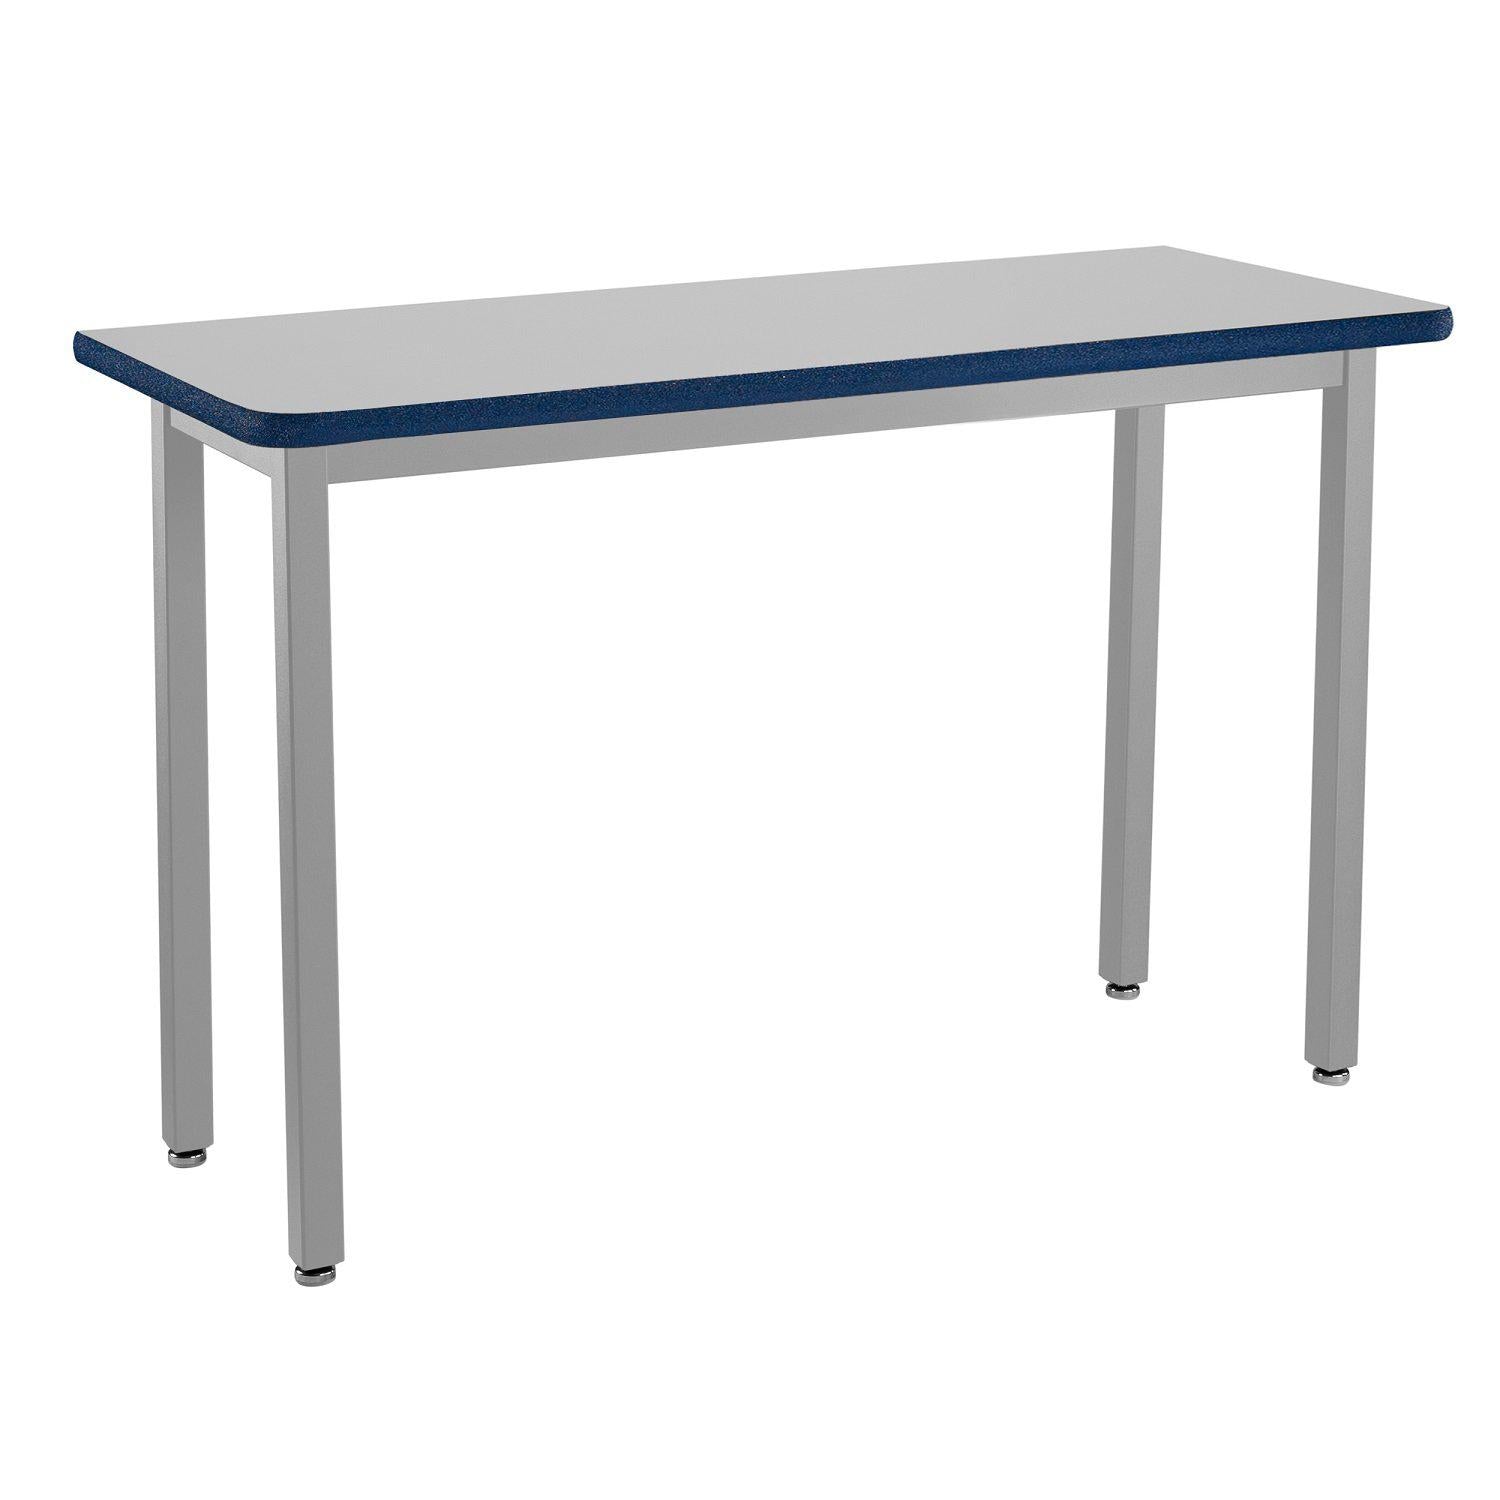 Heavy-Duty Fixed Height Utility Table, Soft Grey Frame, 18" x 42", Supreme High-Pressure Laminate Top with Black ProtectEdge